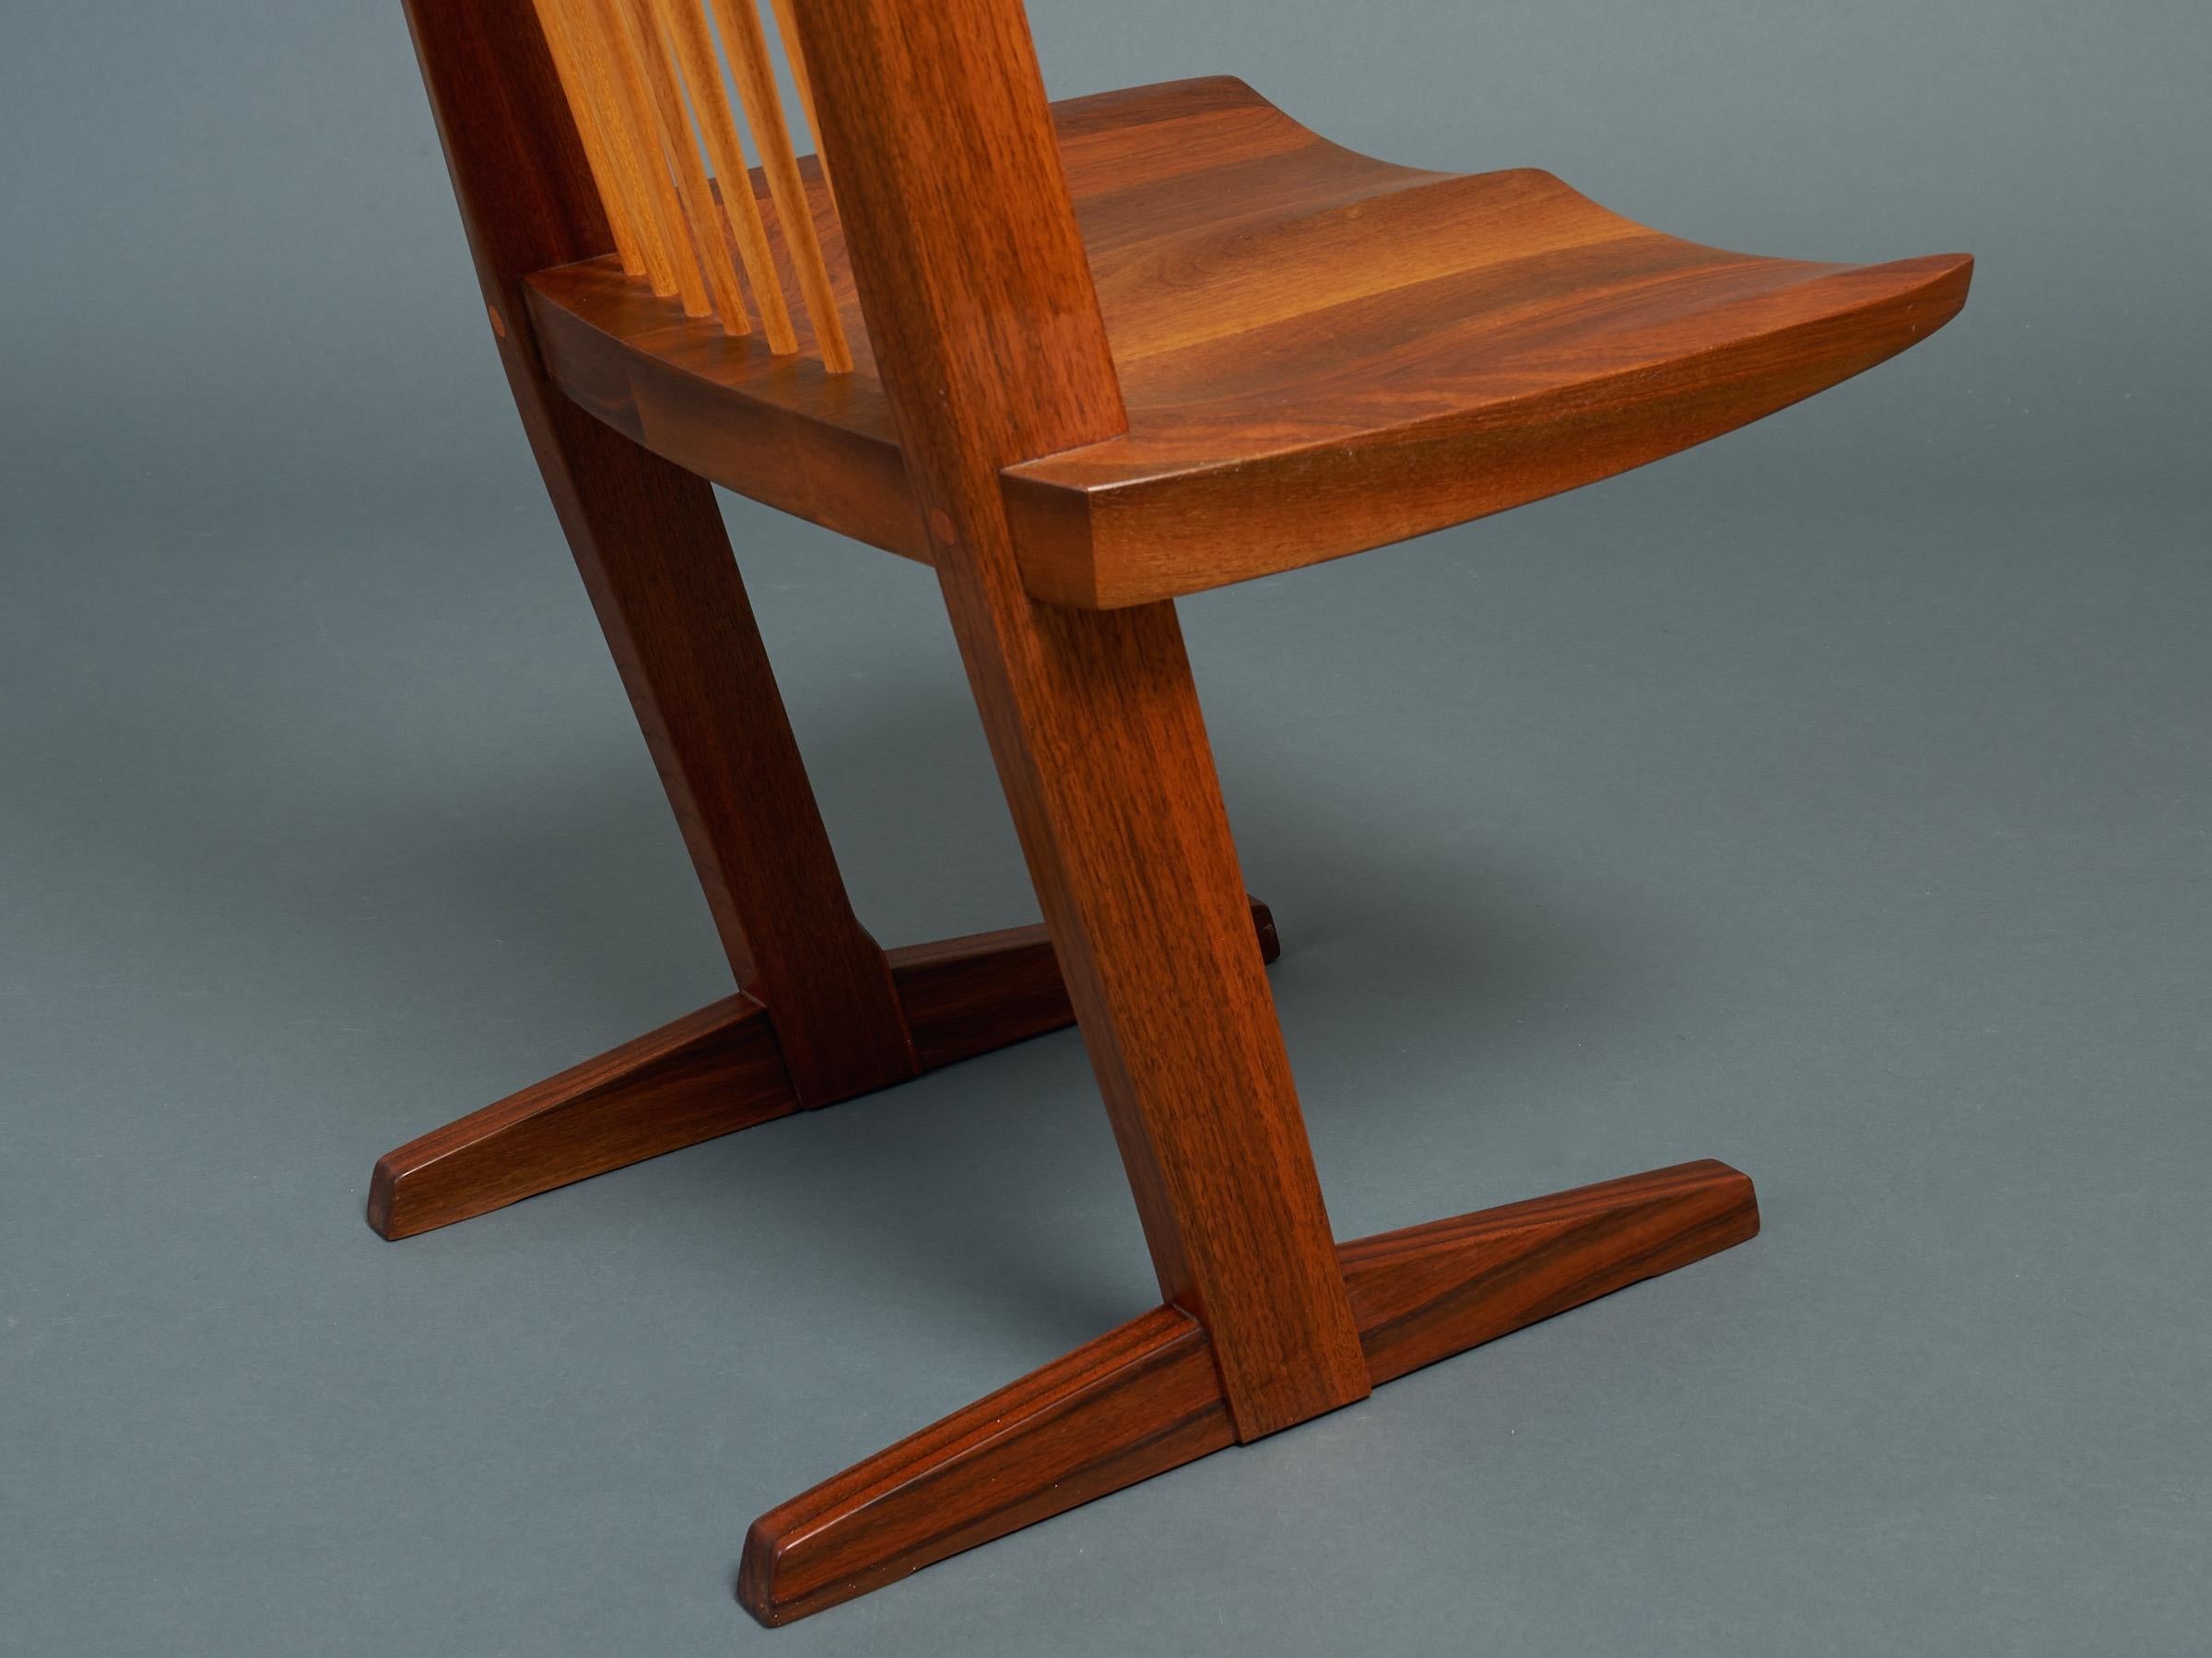 George Nakashima, Rare Sculptural Pair of Conoid Chairs in Walnut, Signed, 1989 For Sale 9